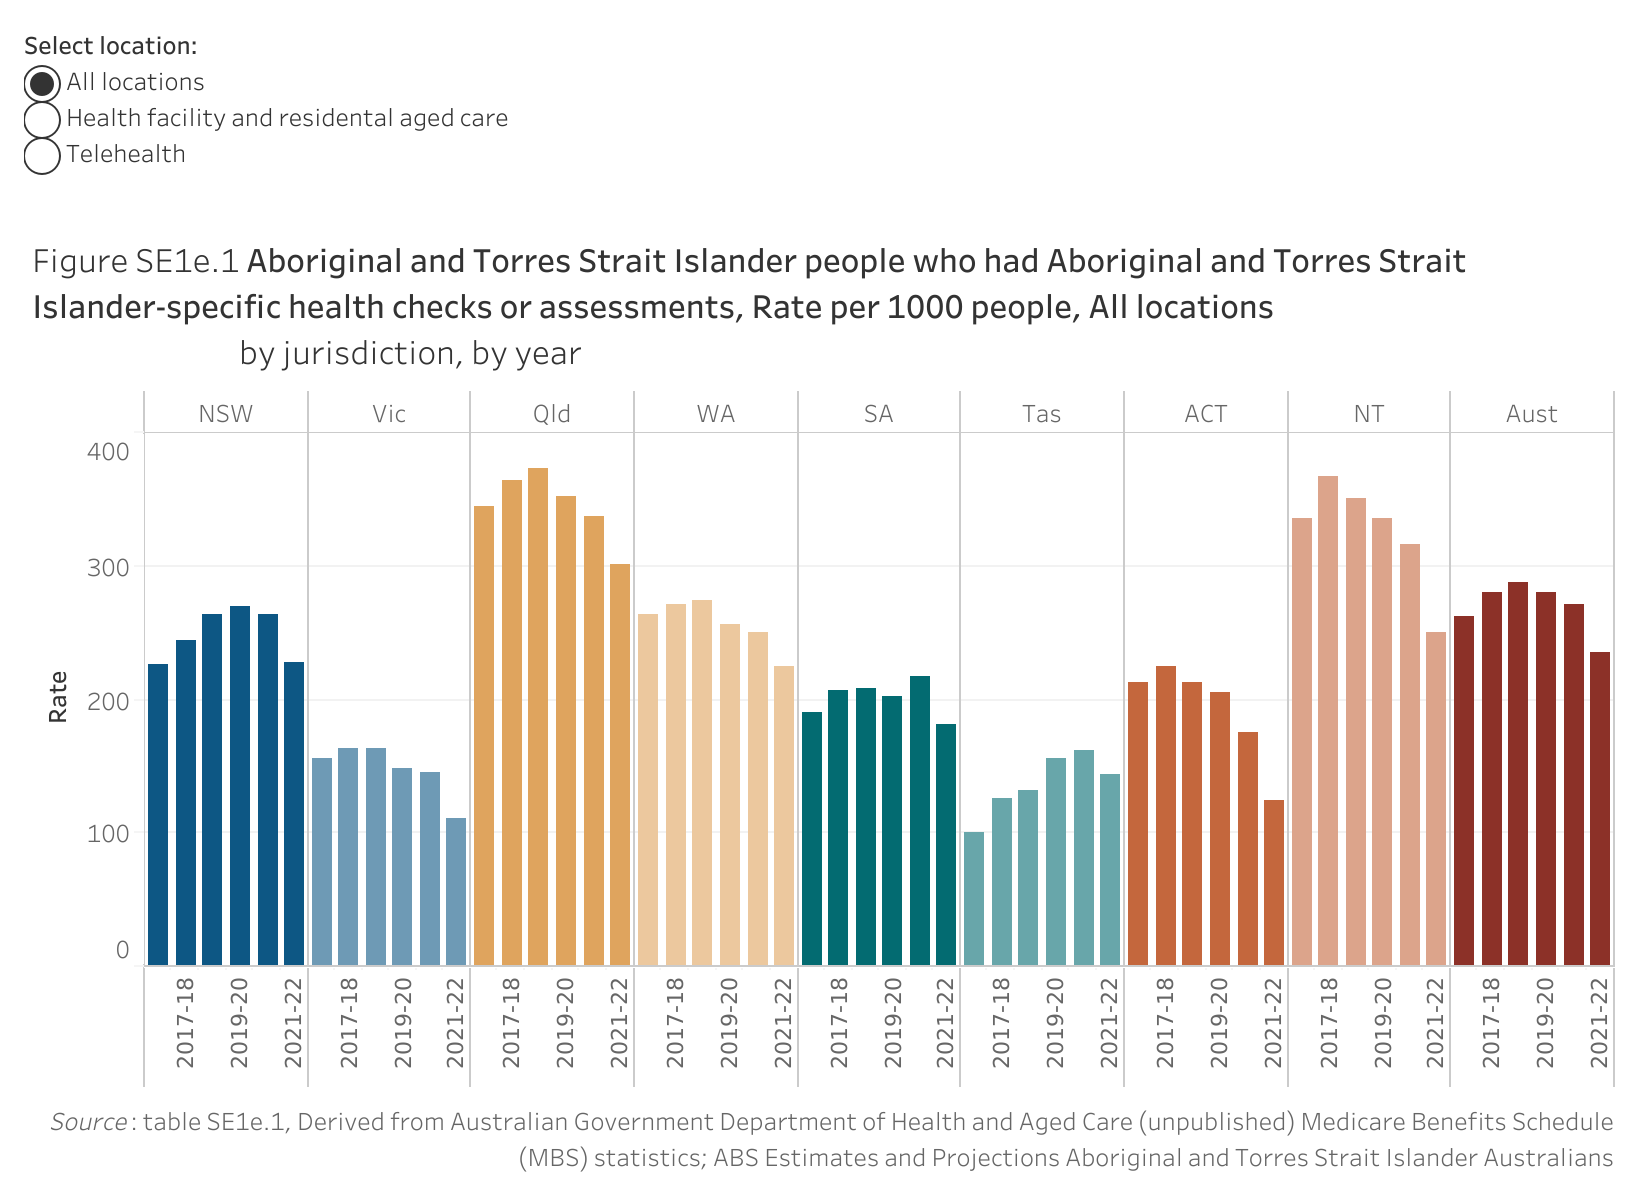 Figure SE1e.1 shows Aboriginal and Torres Strait Islander people who had Aboriginal and Torres Strait Islander-specific health checks or assessments, rate per 1000 people, all locations, by jurisdiction, by year. More details can be found within the text near this image.